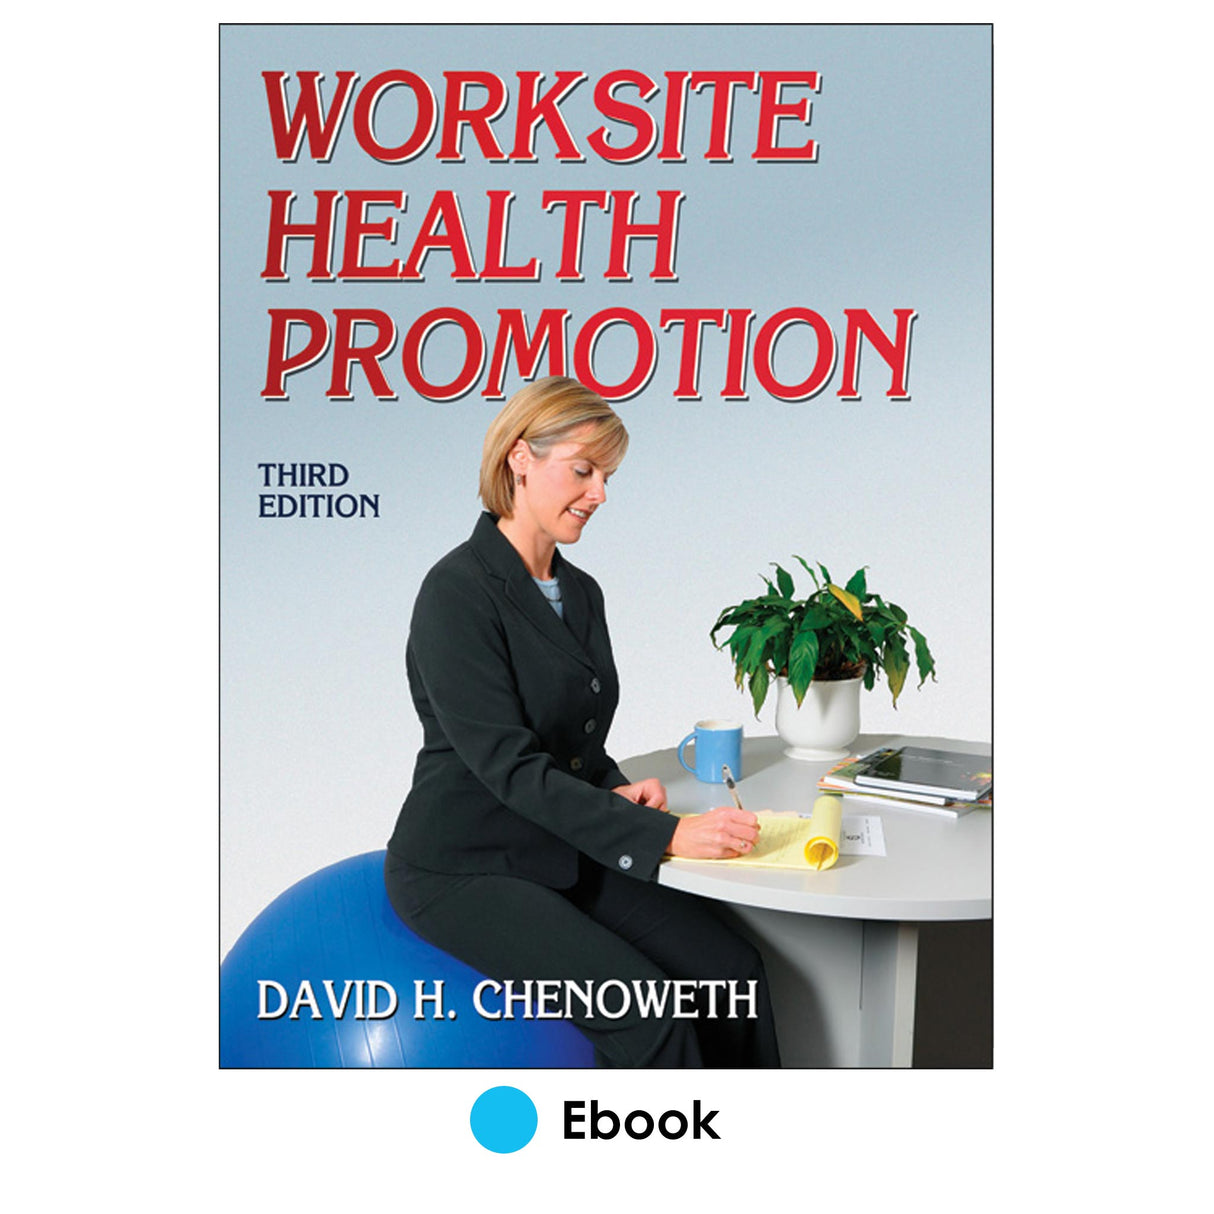 Worksite Health Promotion 3rd Edition PDF